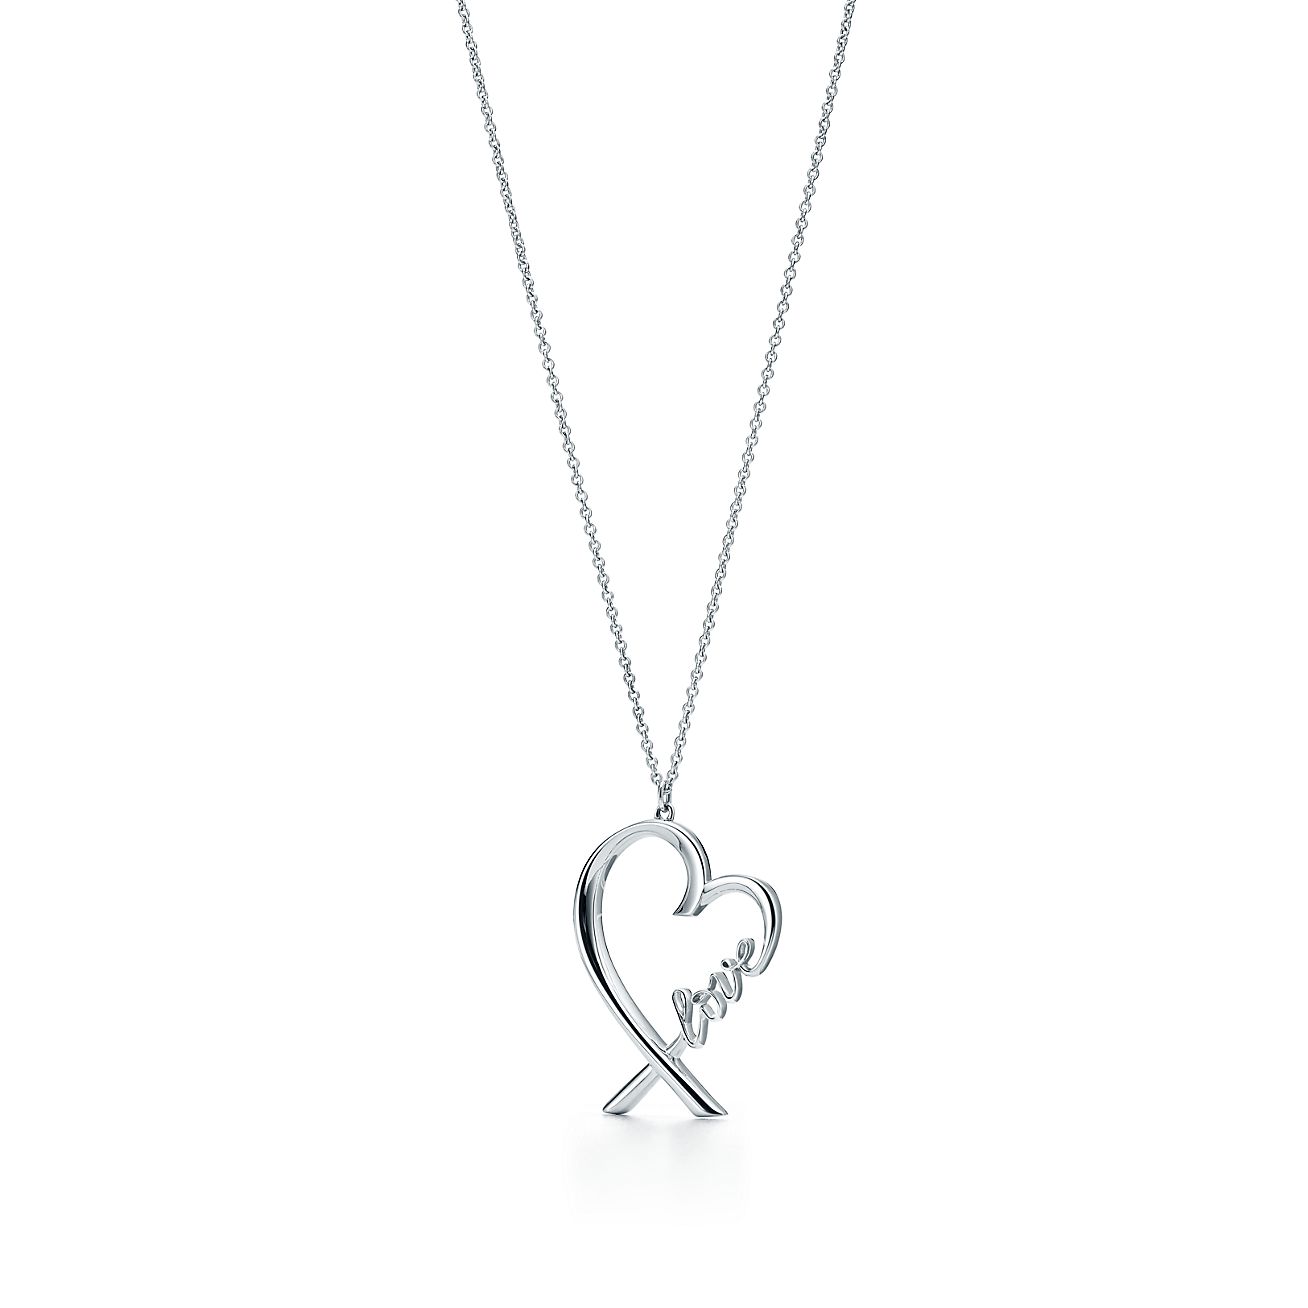 tiffany and co necklace love heart